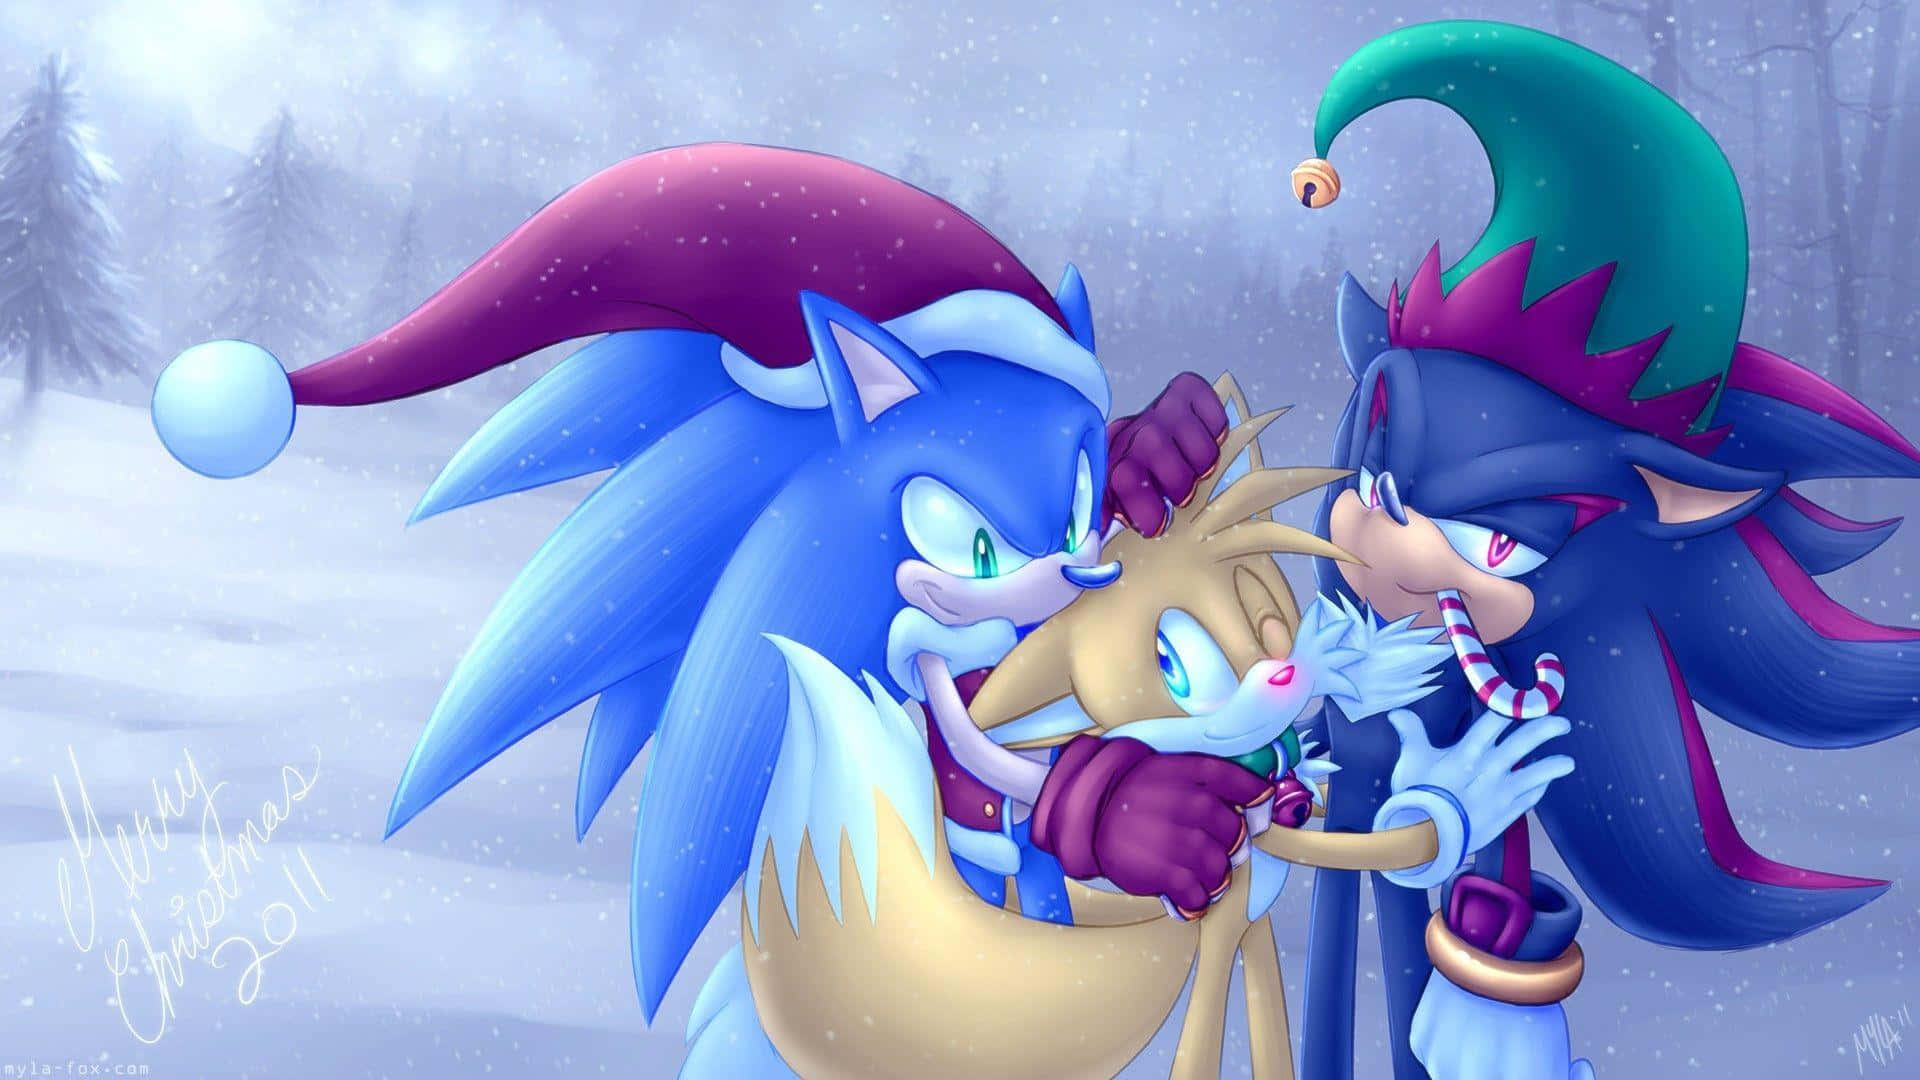 Sonic And Sonic The Hedgehog In Santa Hats Wallpaper